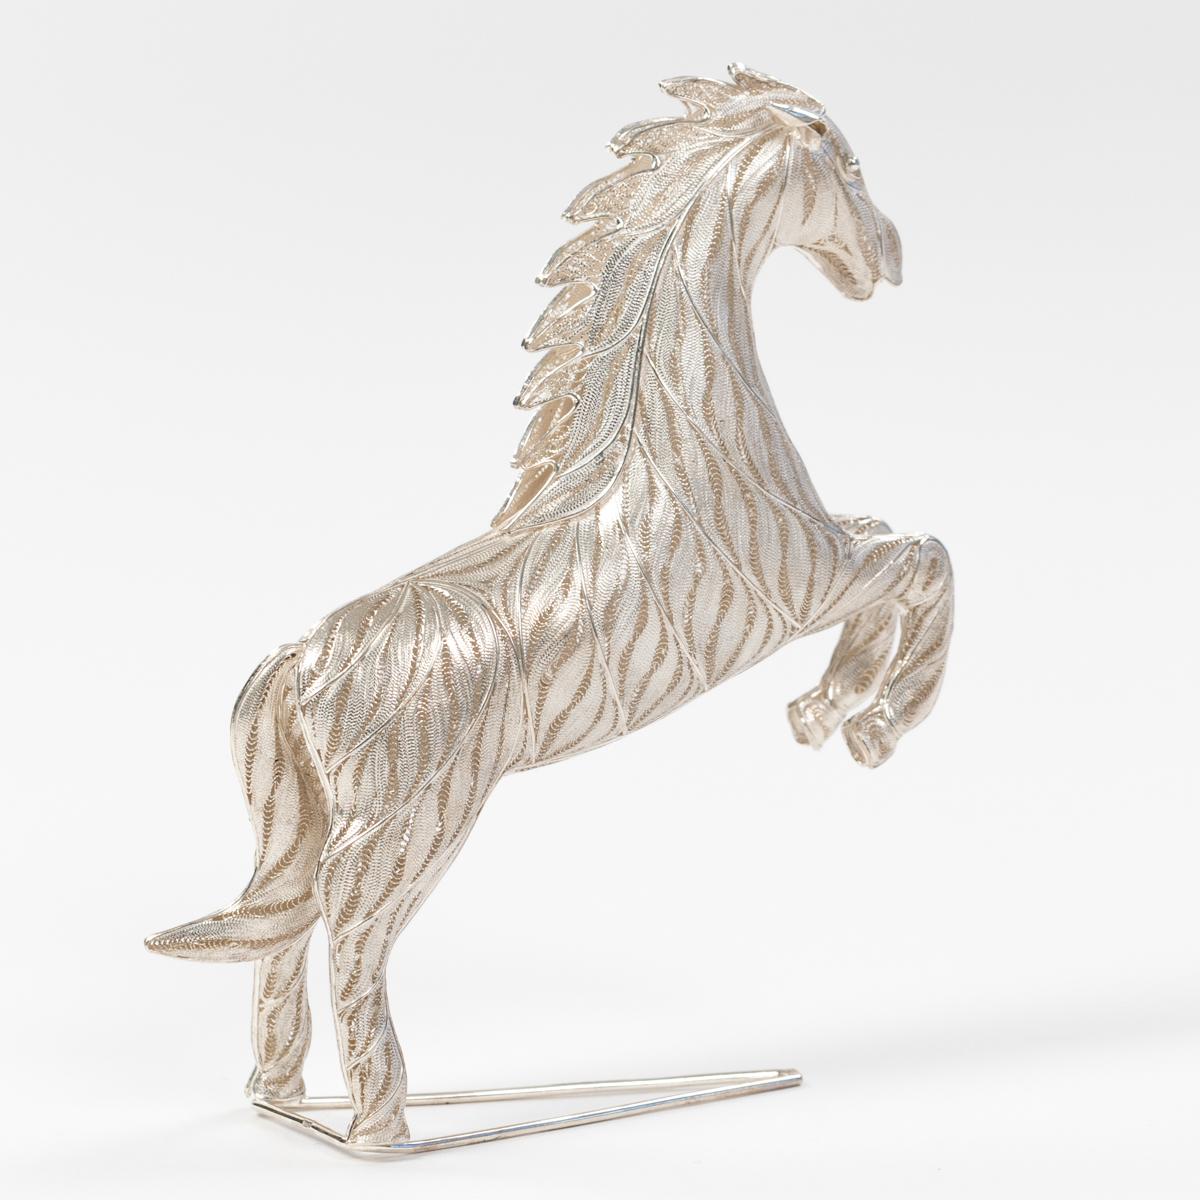 Other Jumping Horse Sculpture 925 Silver Handcrafted Filigree Technique Germany 2005 For Sale